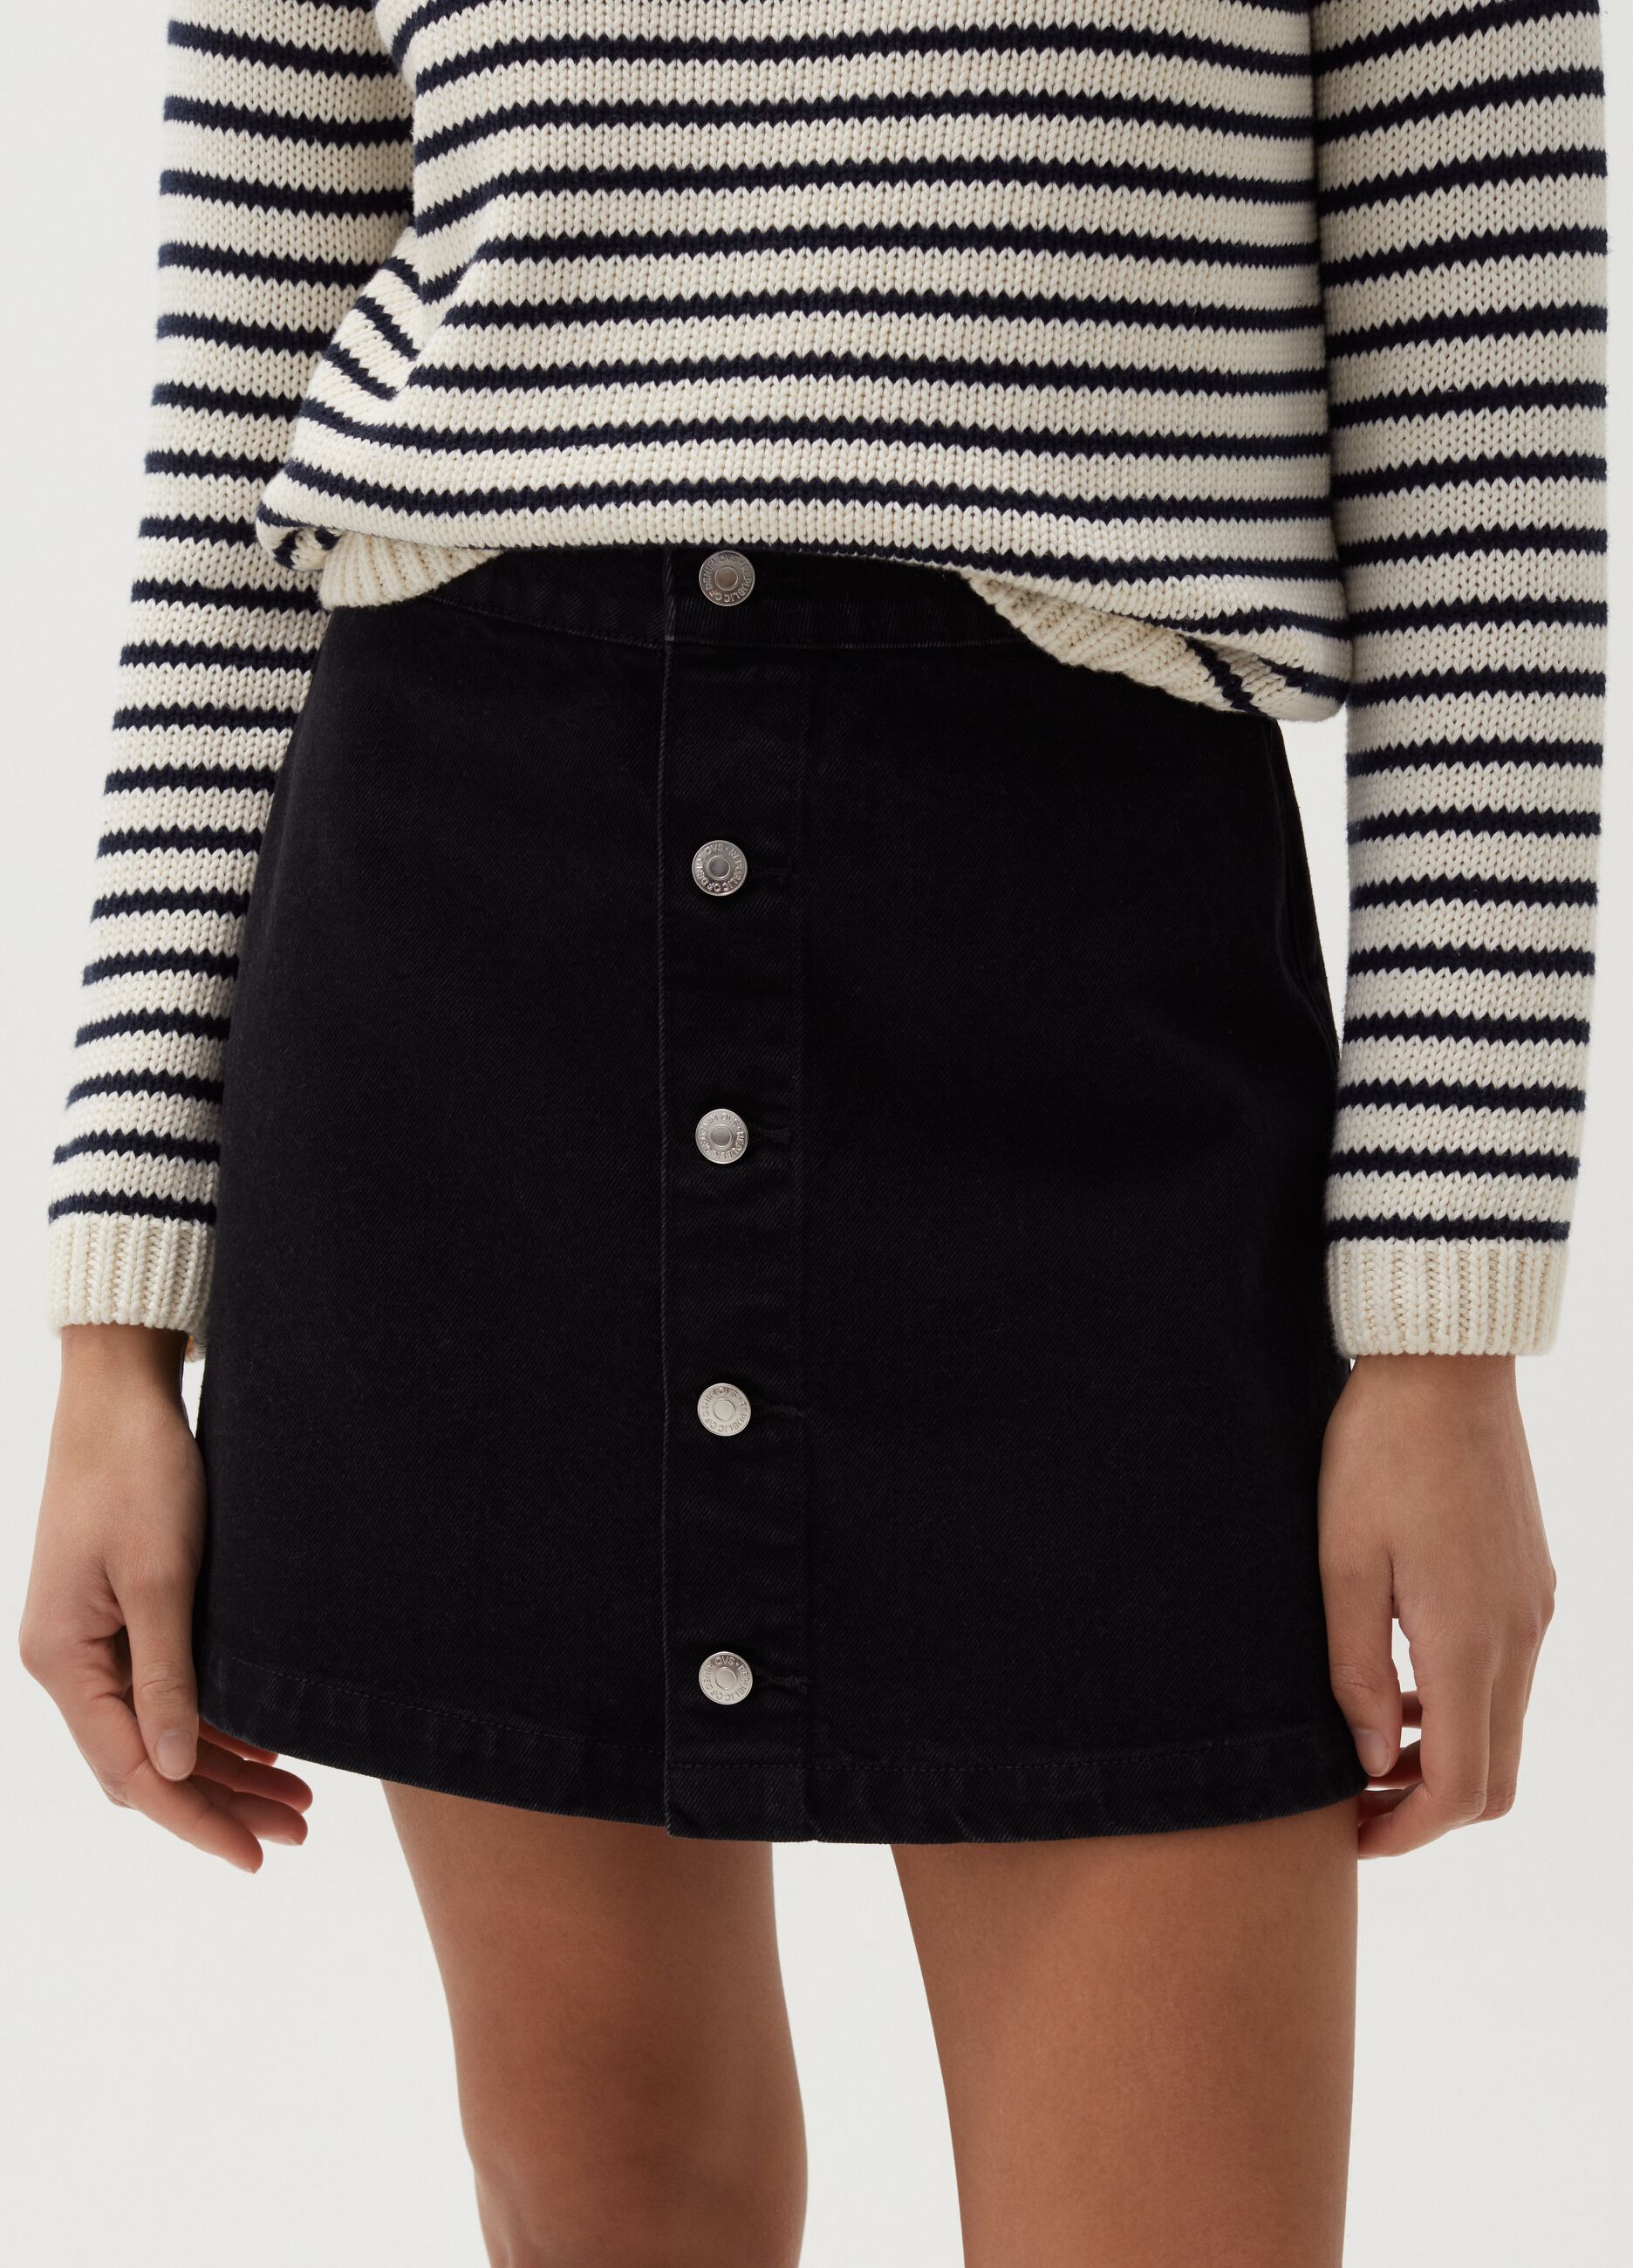 Denim mini skirt with buttons